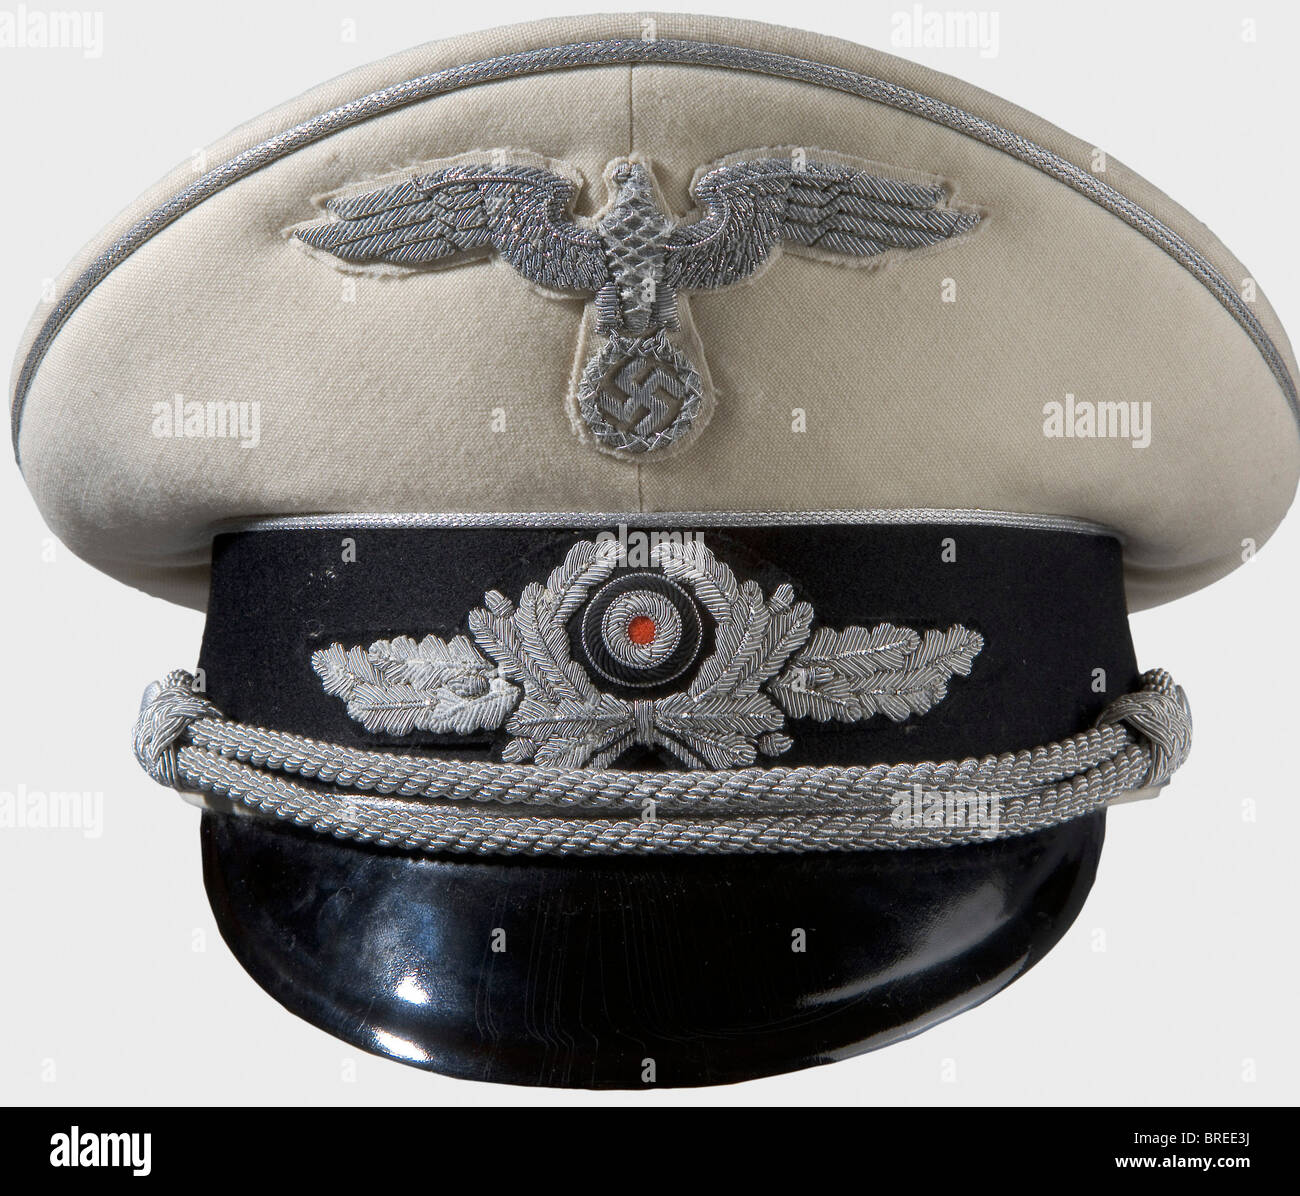 Franz von Papen (1879 - 1969), a summer service cap for the diplomat's uniform Fine, white linen with black cap band and silver piping, silver-embroidered party eagle on white backing, silver-embroidered cap wreath on black backing, and a silver cap cord. Cream-coloured silk lining with the von Papen family coat of arms on the inside label. Insignia are slightly oxidized. In 1932, Franz von Papen was appointed Reich's Chancellor by the Reich's President Paul von Hindenburg, during 1933 - 1934, he was vice-chancellor in Hitler's cabinet, as ambassador, he played, Stock Photo